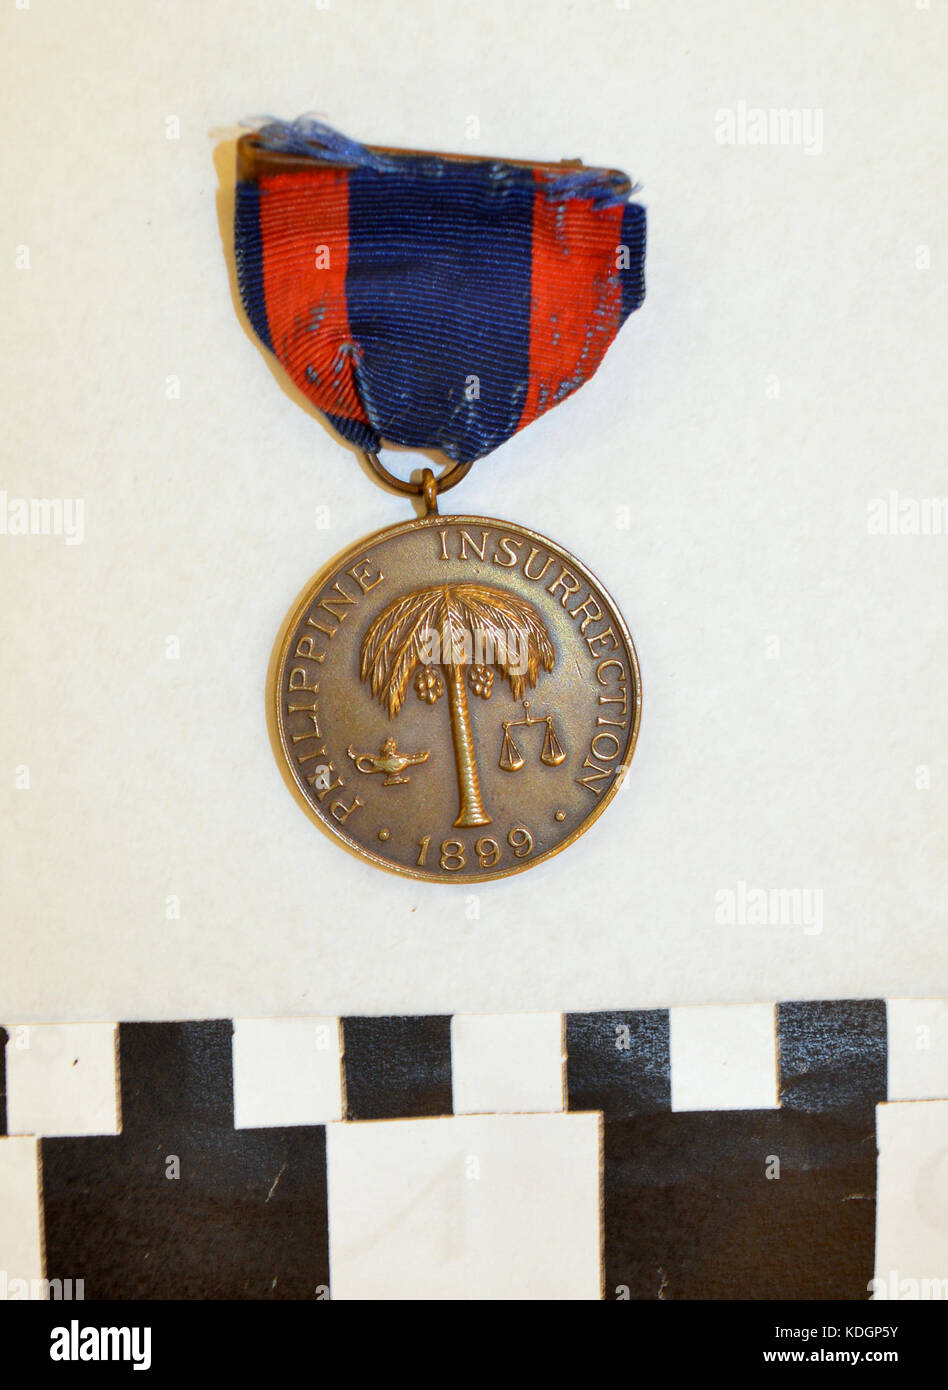 Phillipine Insurrection Medal Issued to Frank M. Rumbold Stock Photo